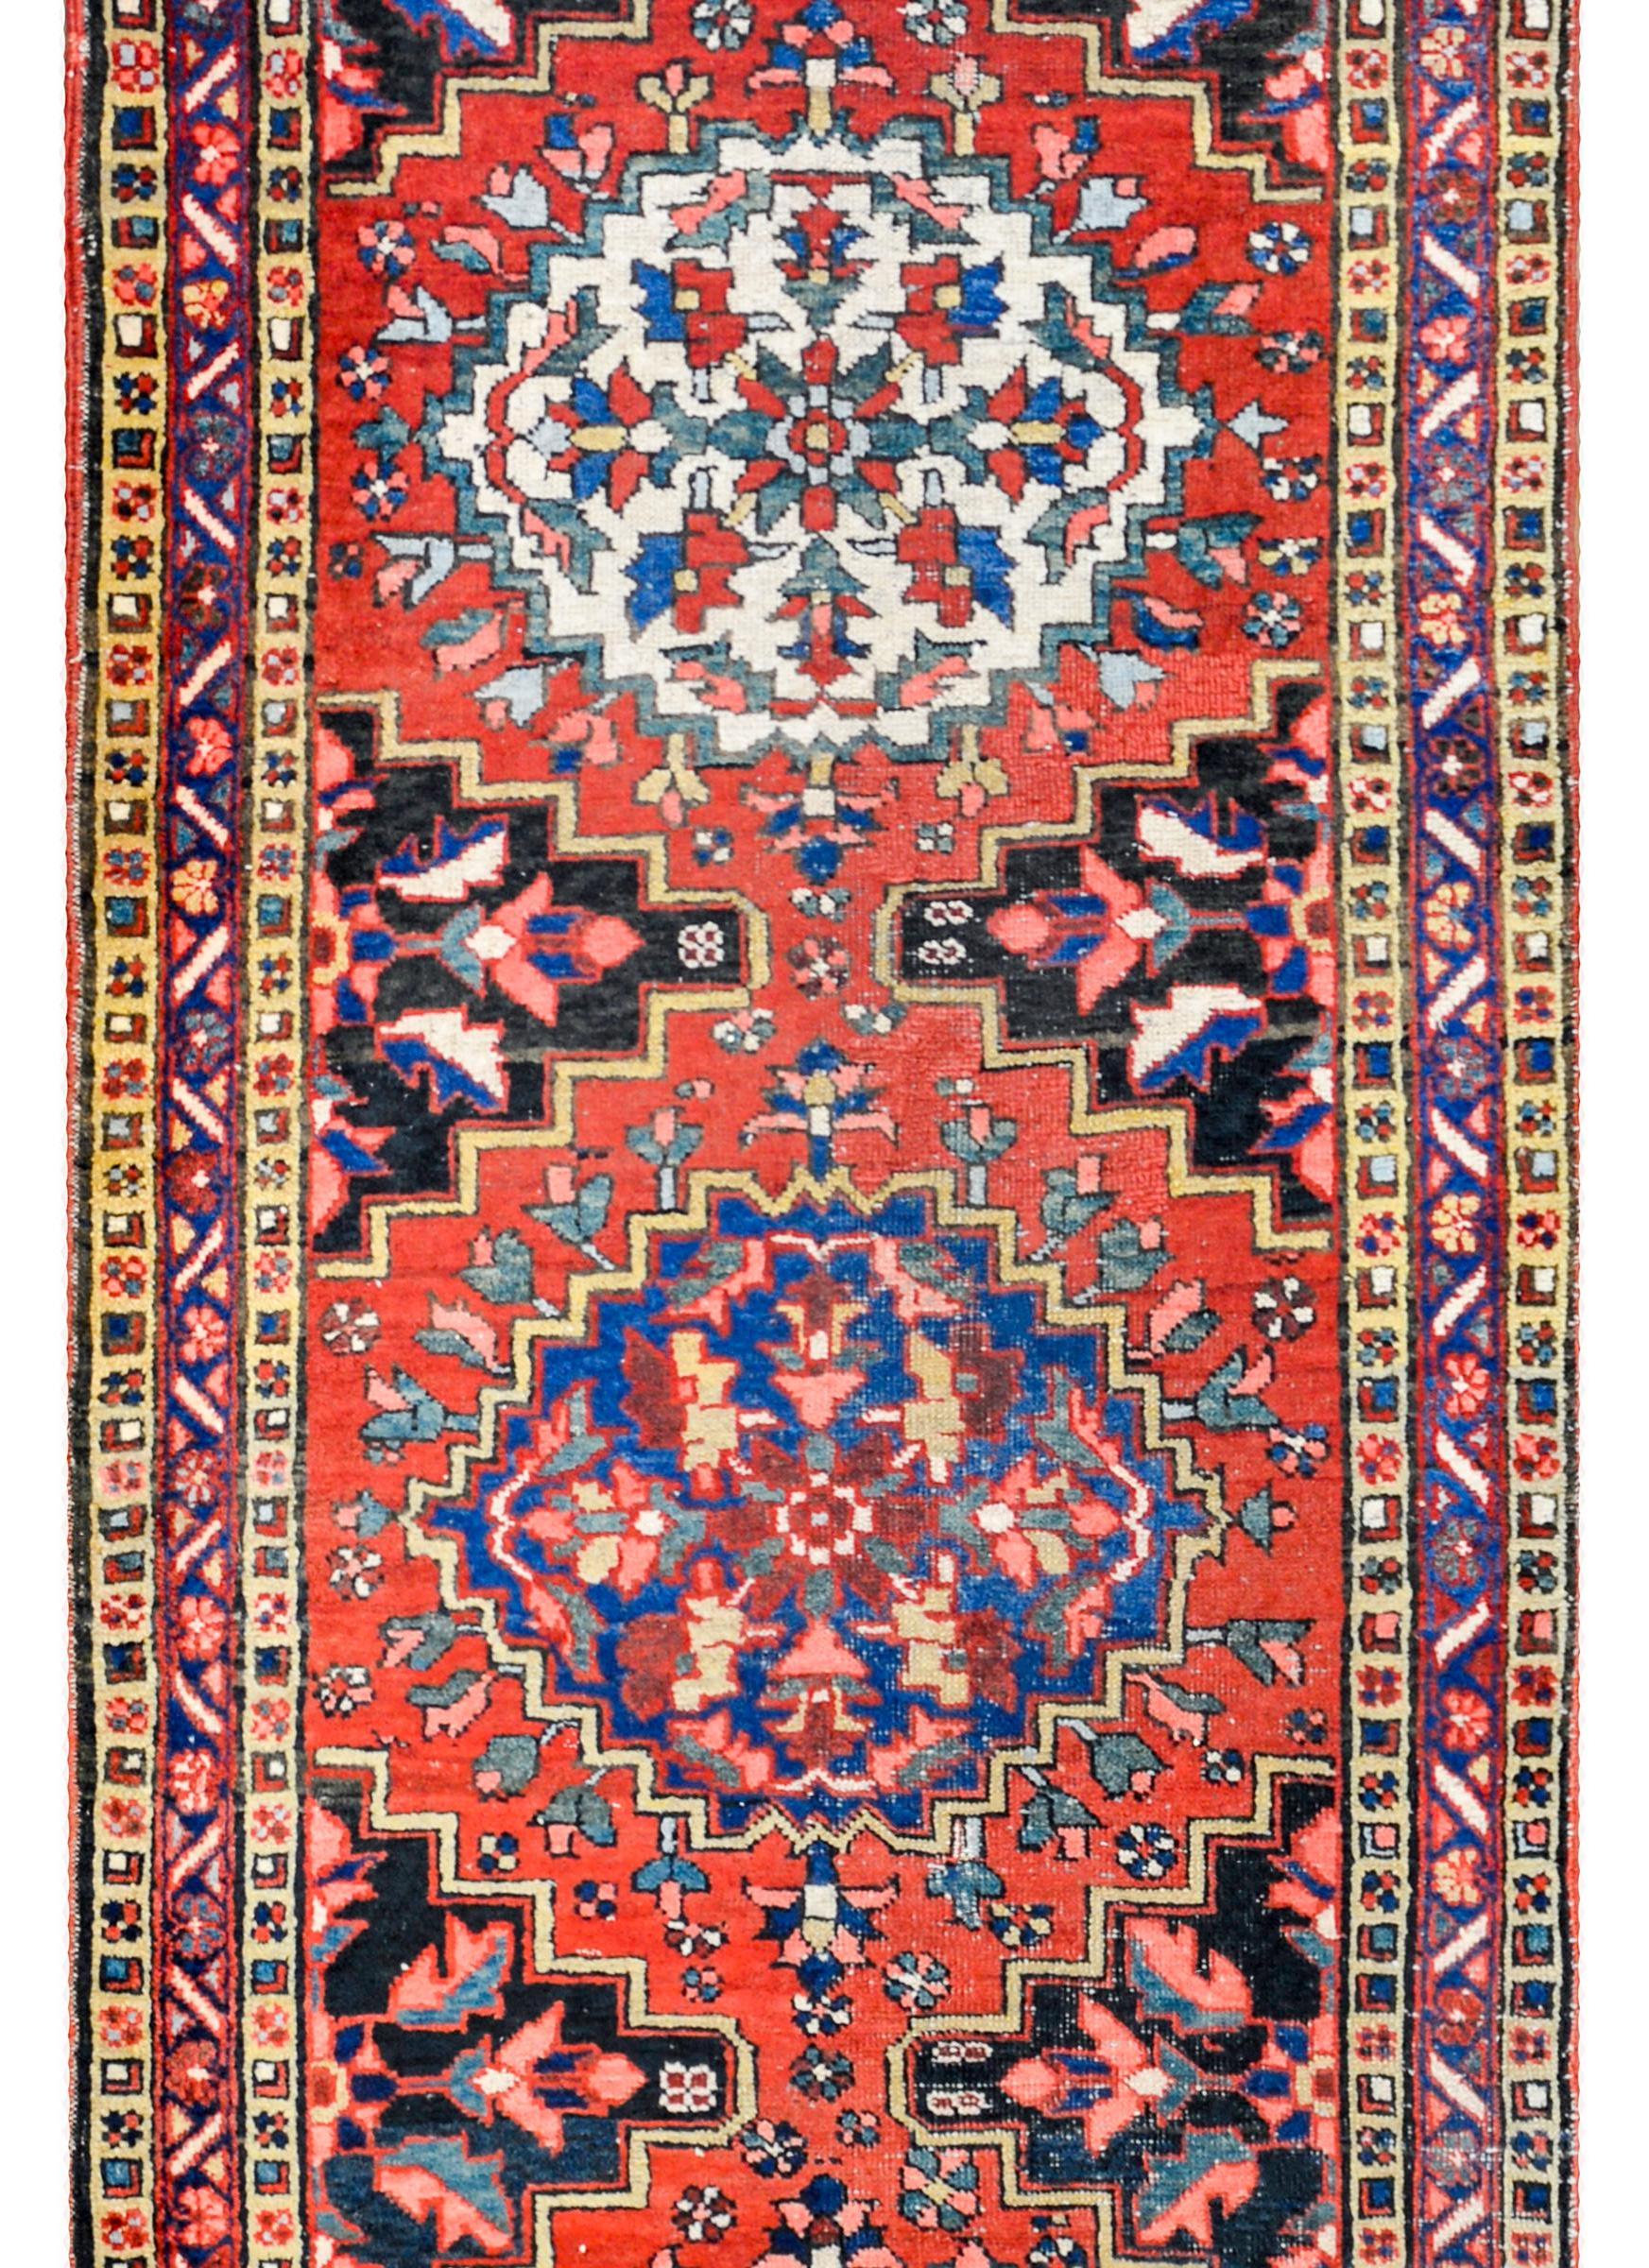 An amazing early 20th century Persian Bakhtiari runner with five large multicolored medallions on a crimson background. The border is complex, with a central stylized floral patterned stripe flanked by matching petite stylized floral stripes.